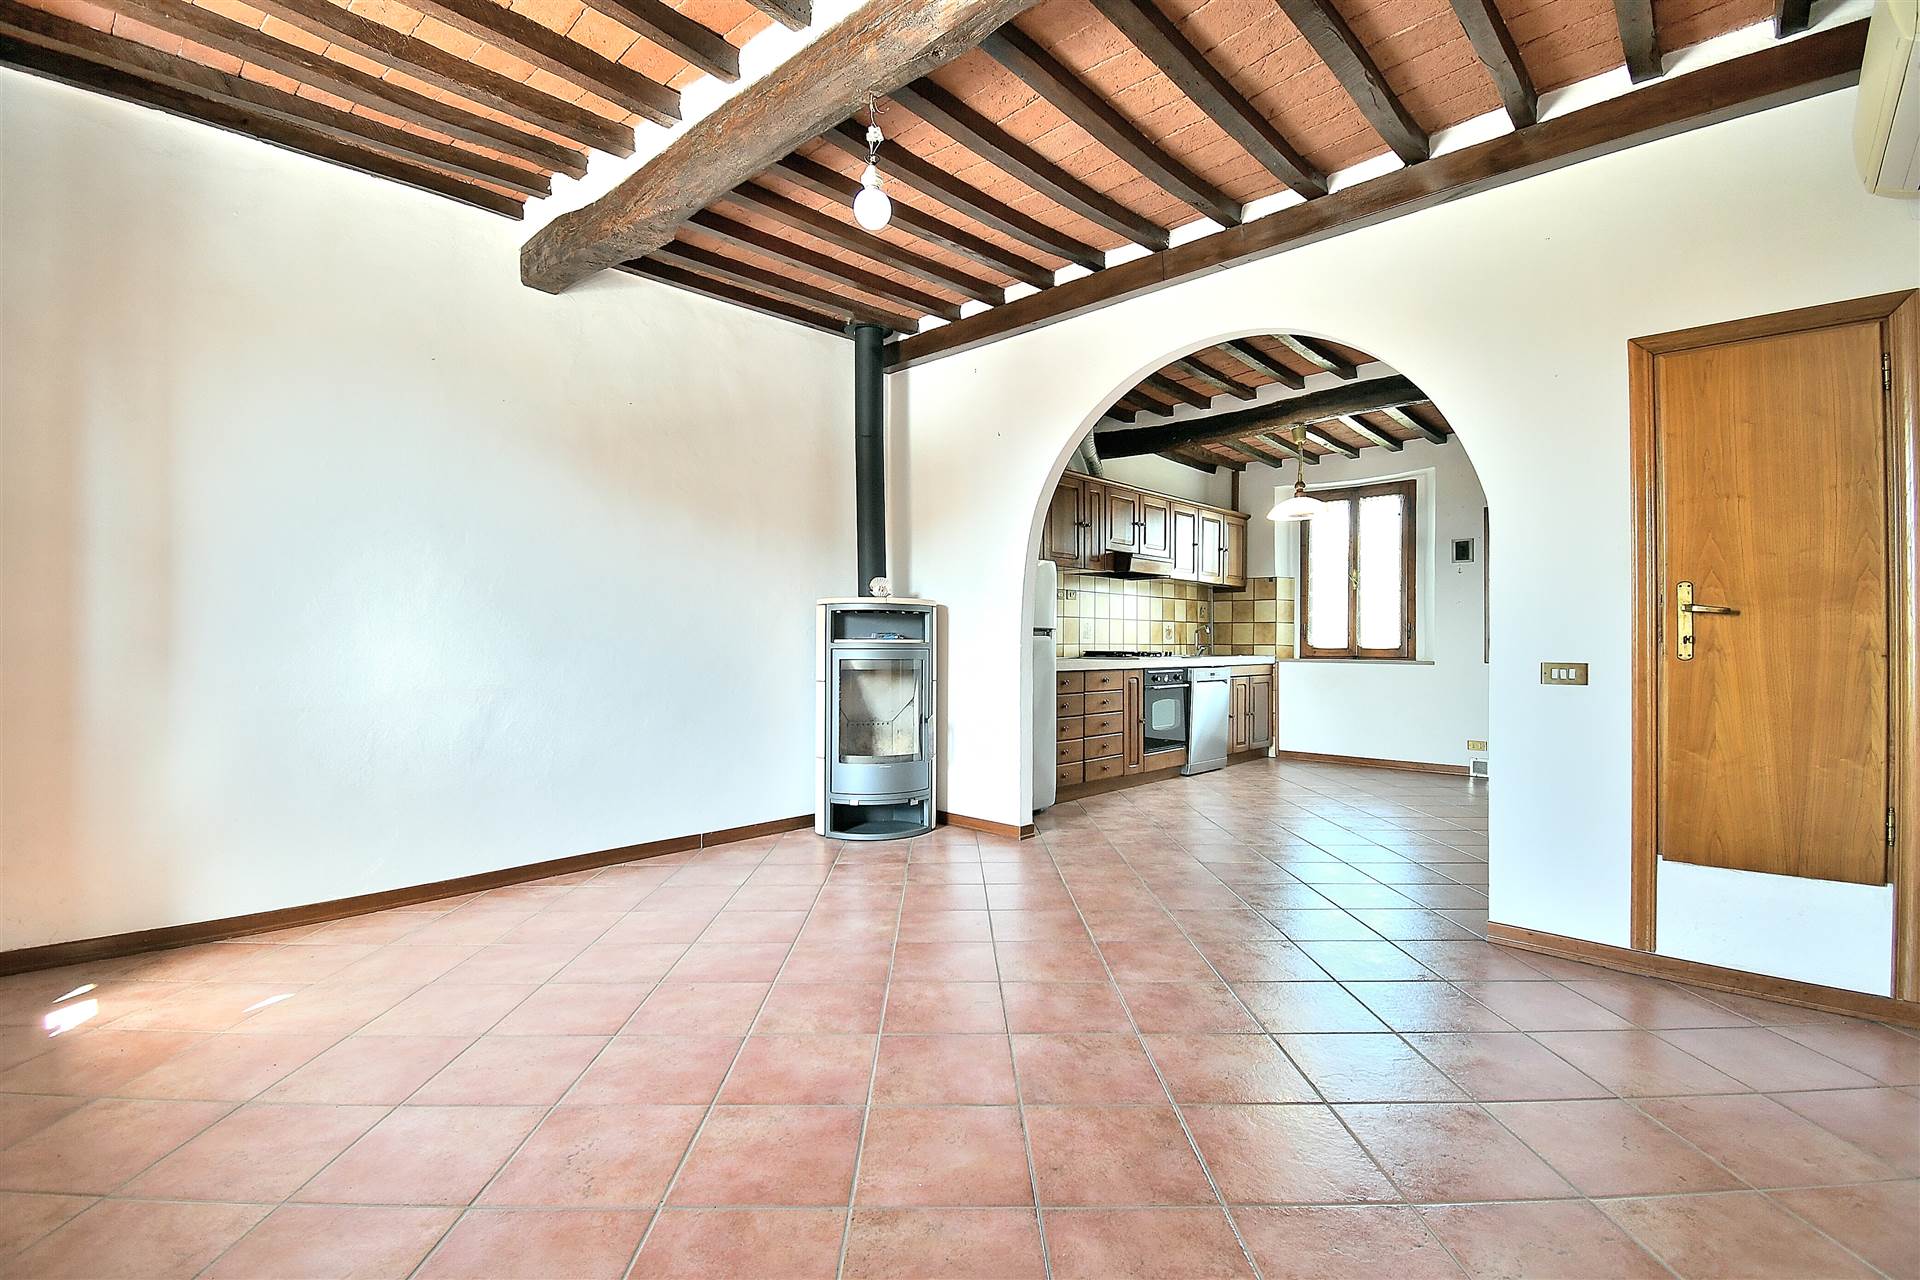 MONTERIGGIONI, Apartment for sale of 78 Sq. mt., Good condition, Heating Individual heating system, Energetic class: G, Epi: 175 kwh/m2 year, placed at 2° on 2, composed by: 4 Rooms, Separate kitchen,